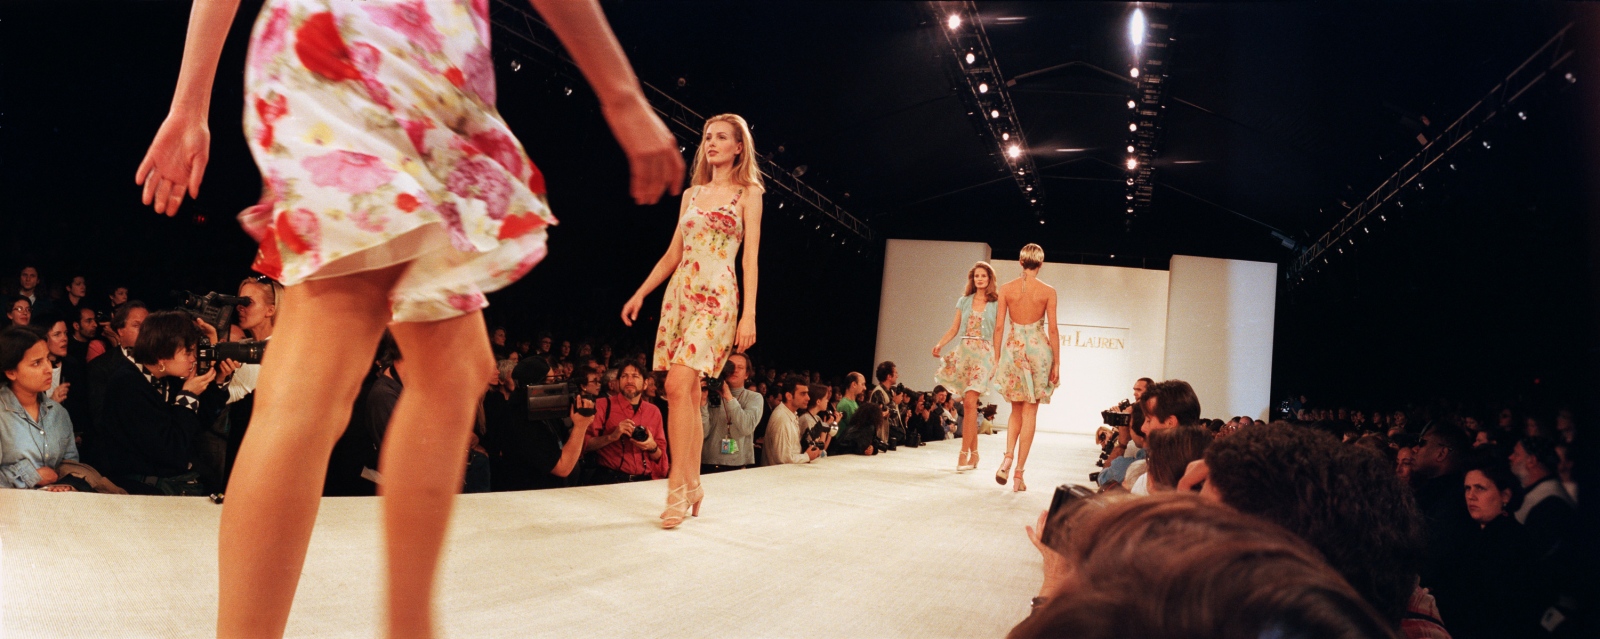 Runway Madness - Young models often comment that the most daunting part of...